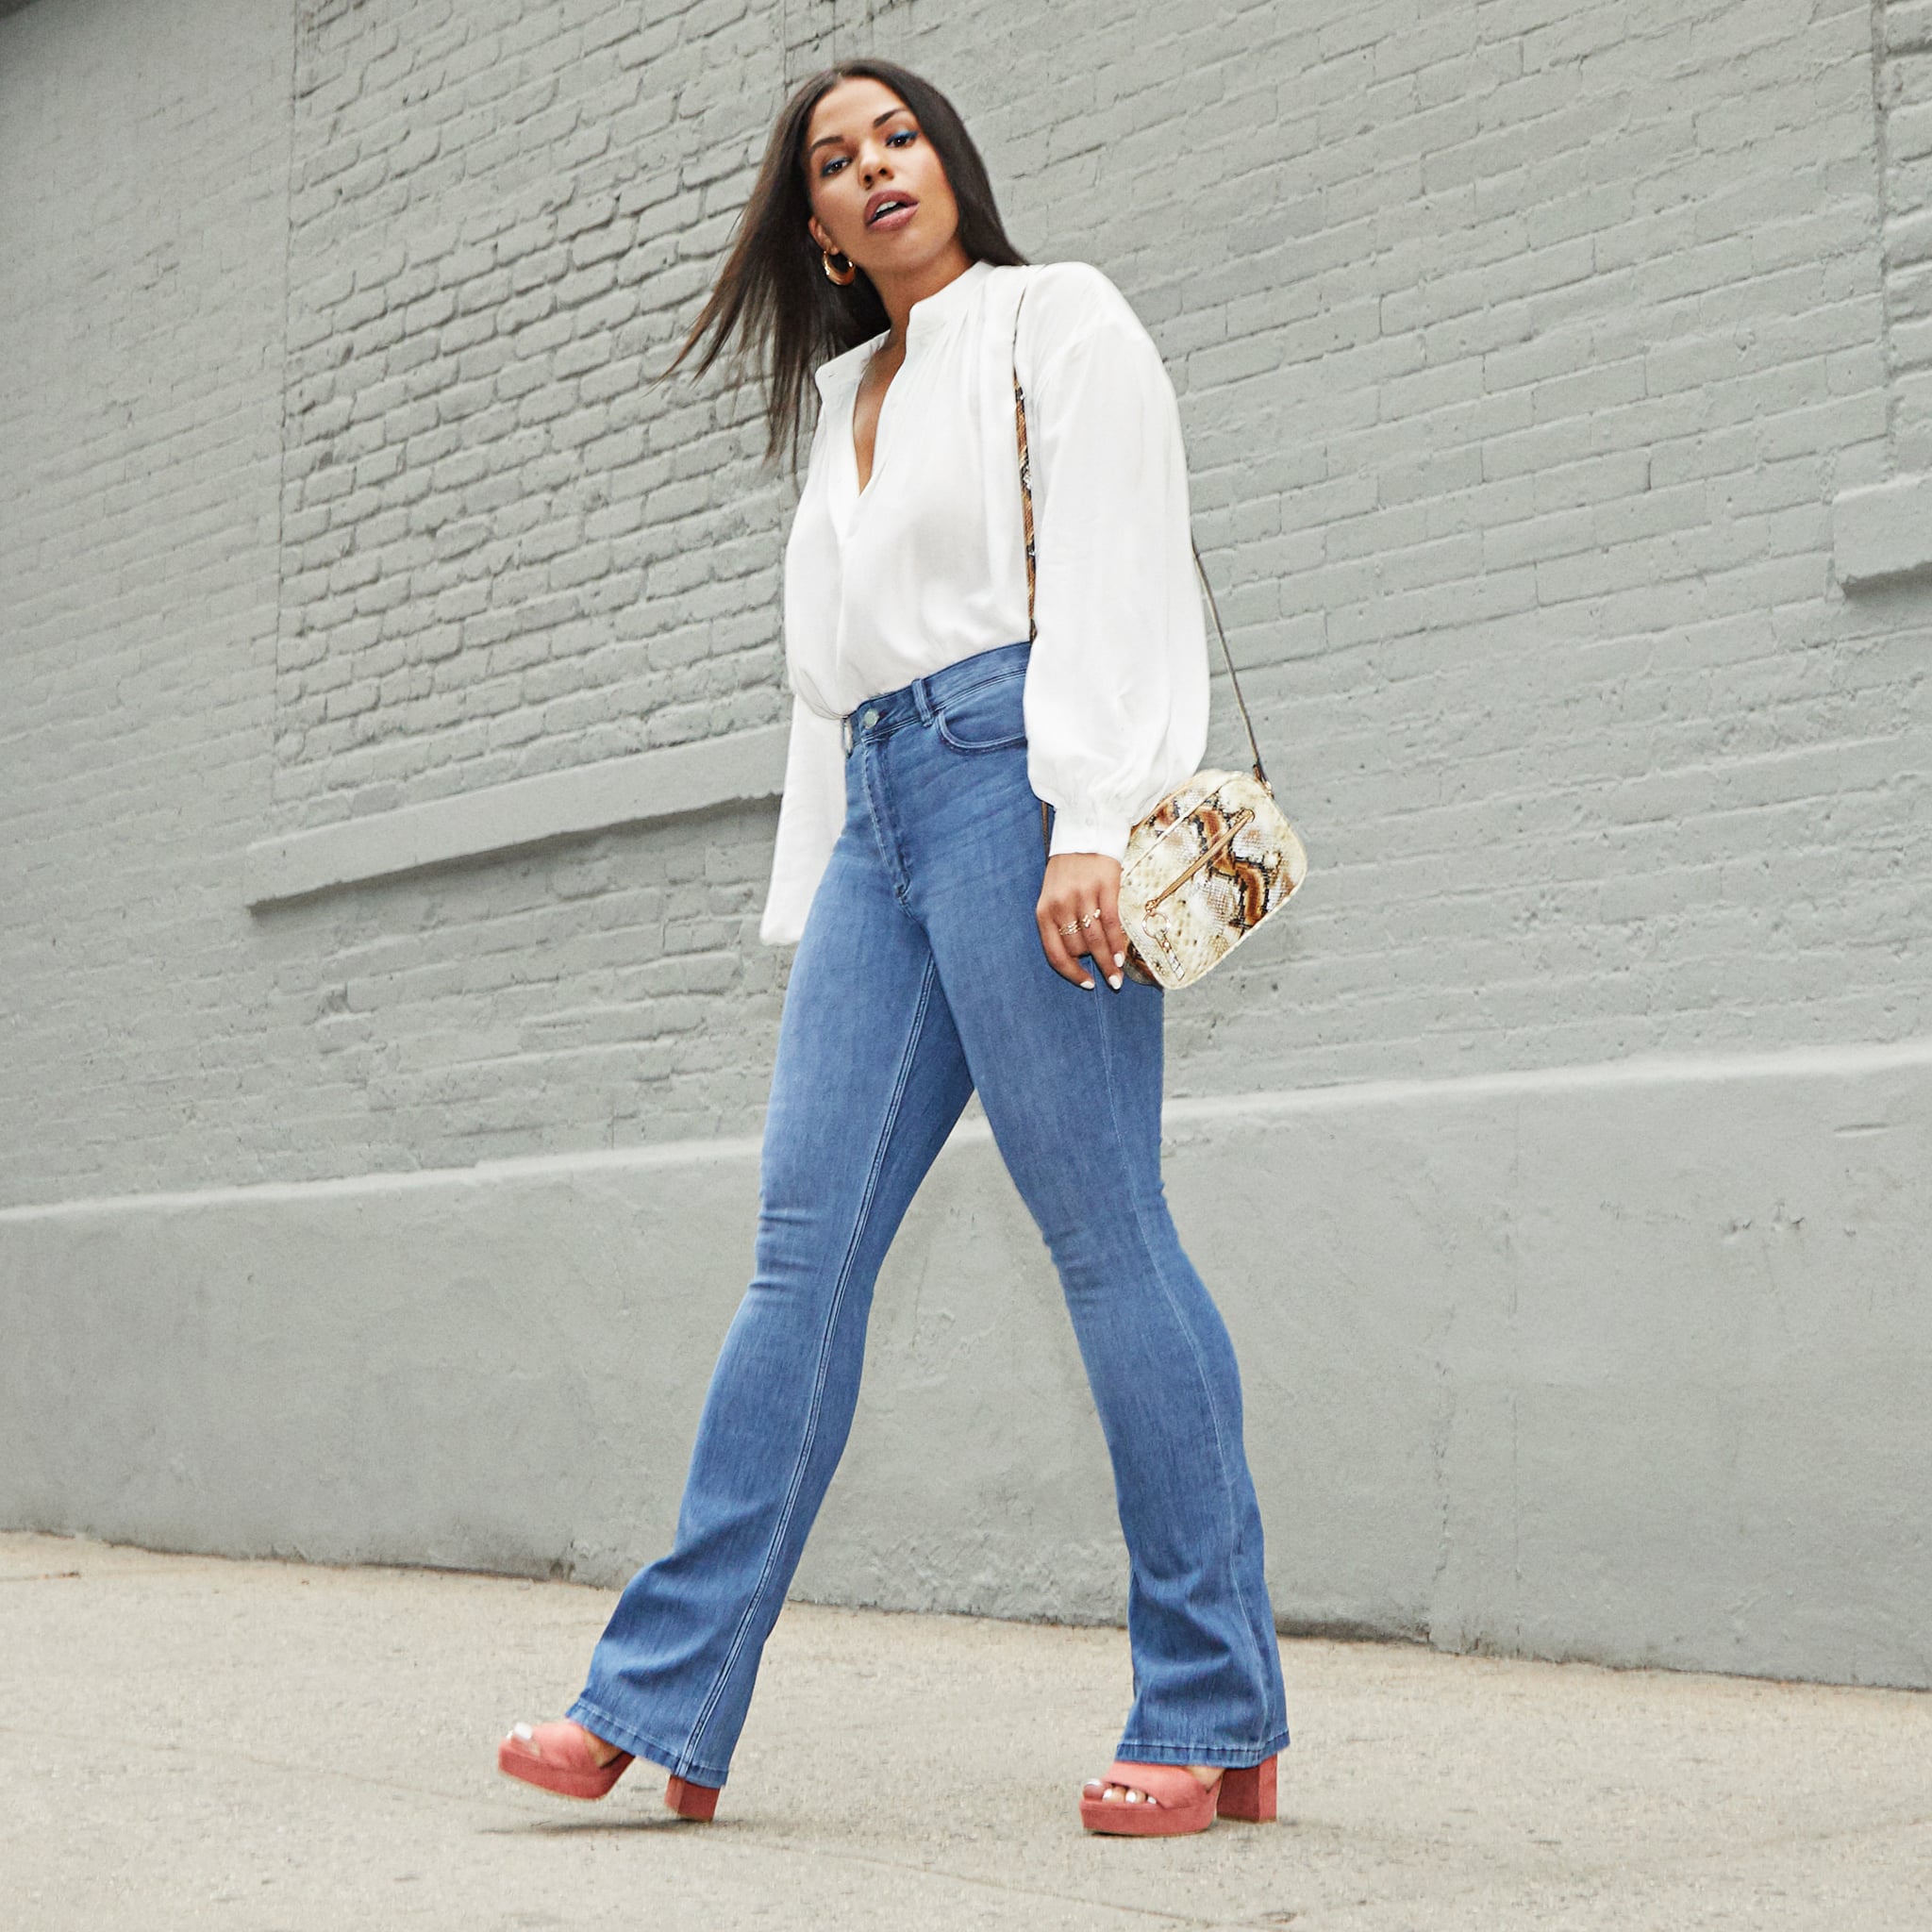 Express outfit. White button down shirt with bell bottom jeans and